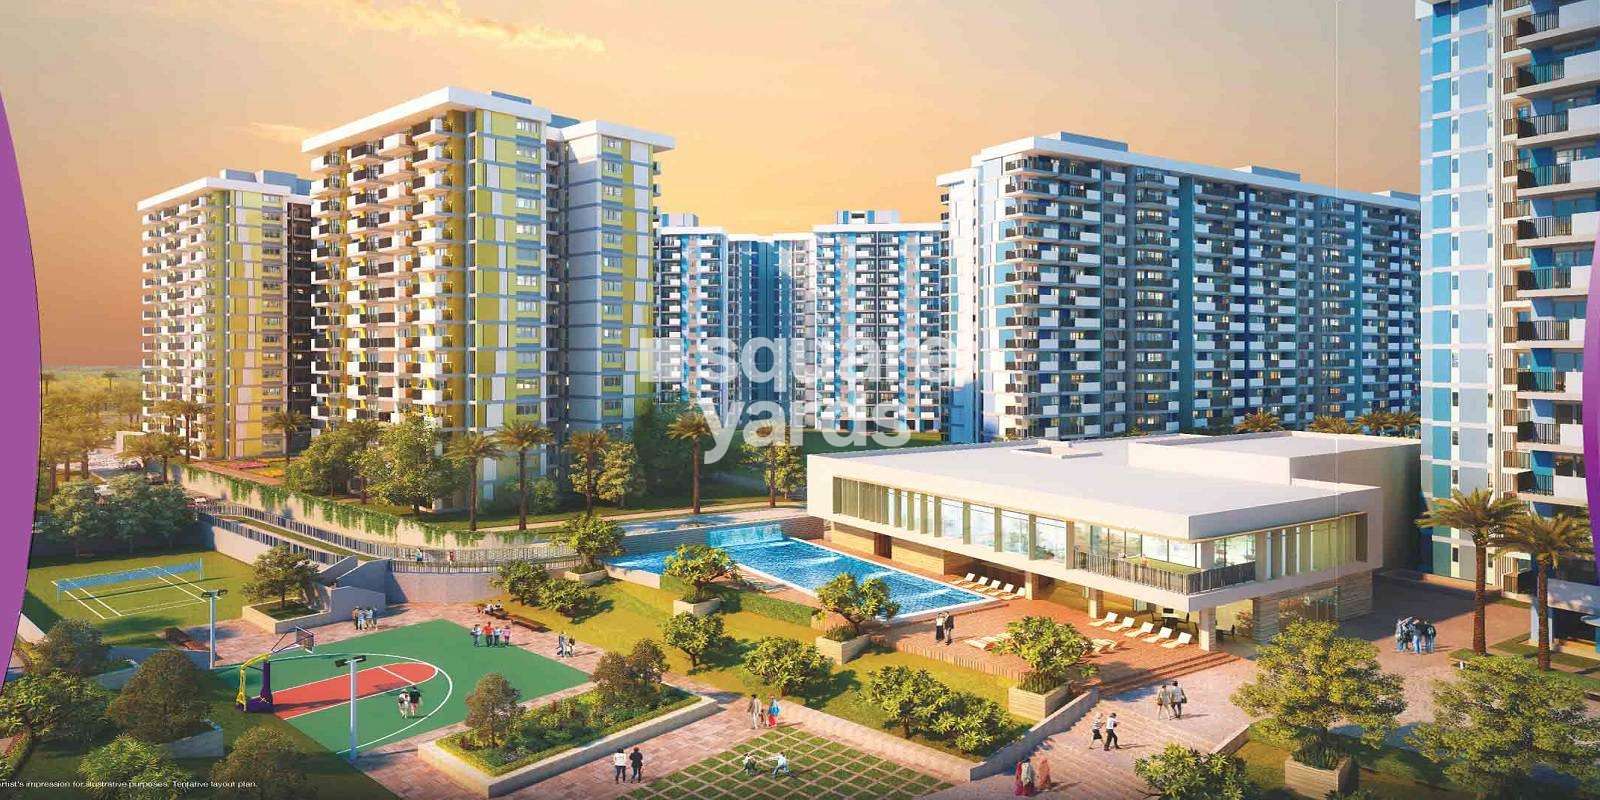 tata value homes new heaven project tower view4